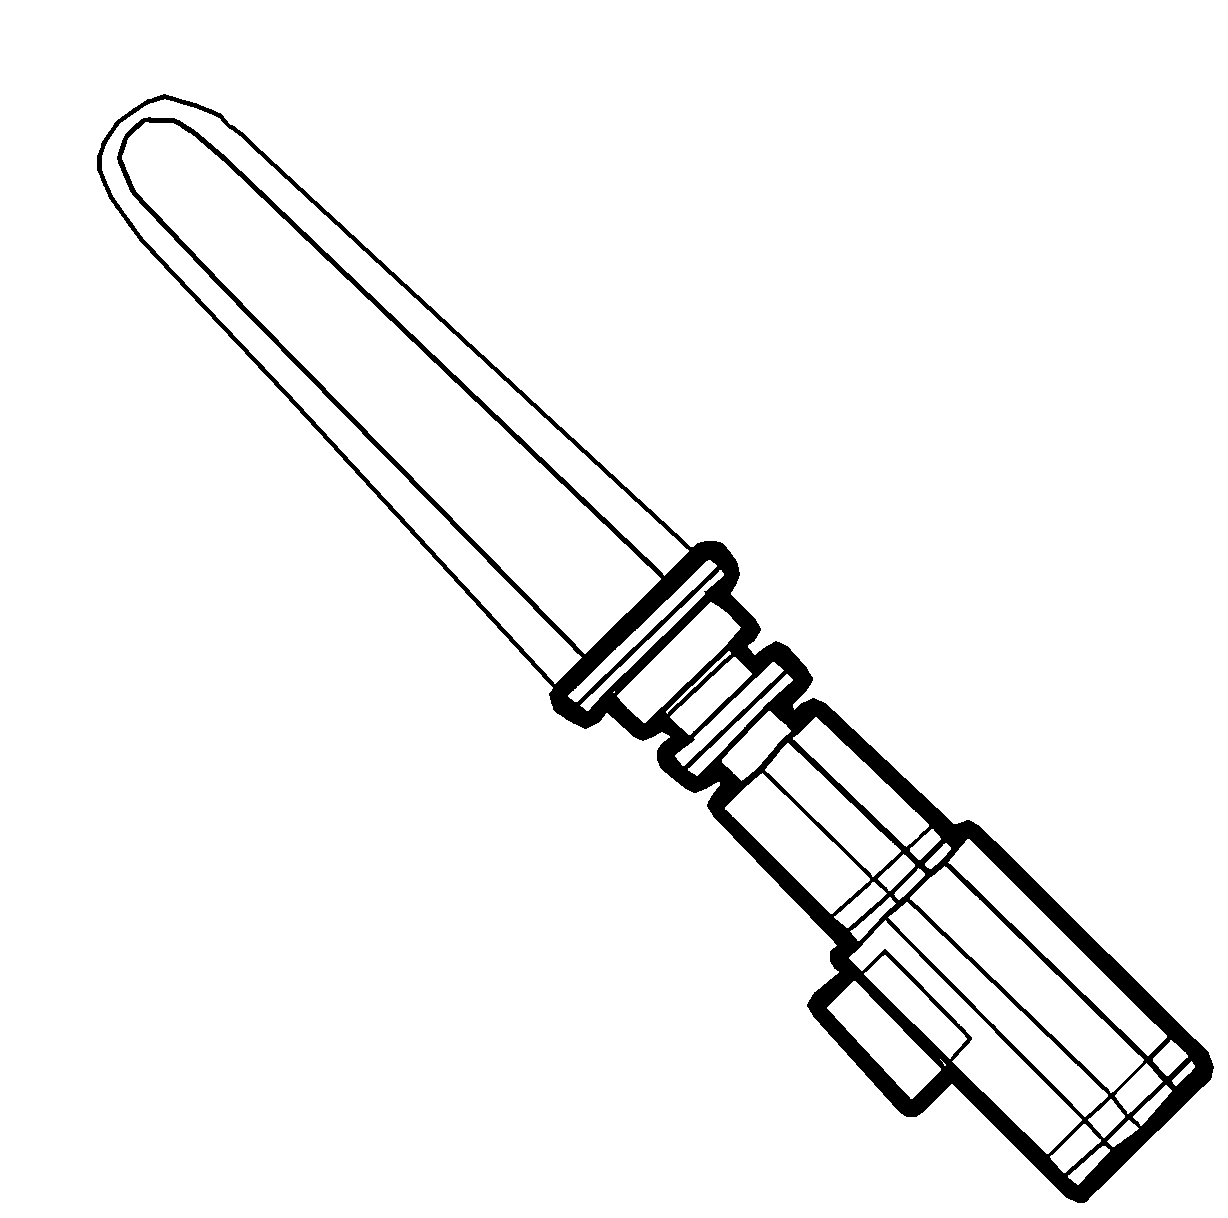 lightsaber coloring pages star wars lightsabers coloringkidsorg coloring kids lightsaber coloring pages 